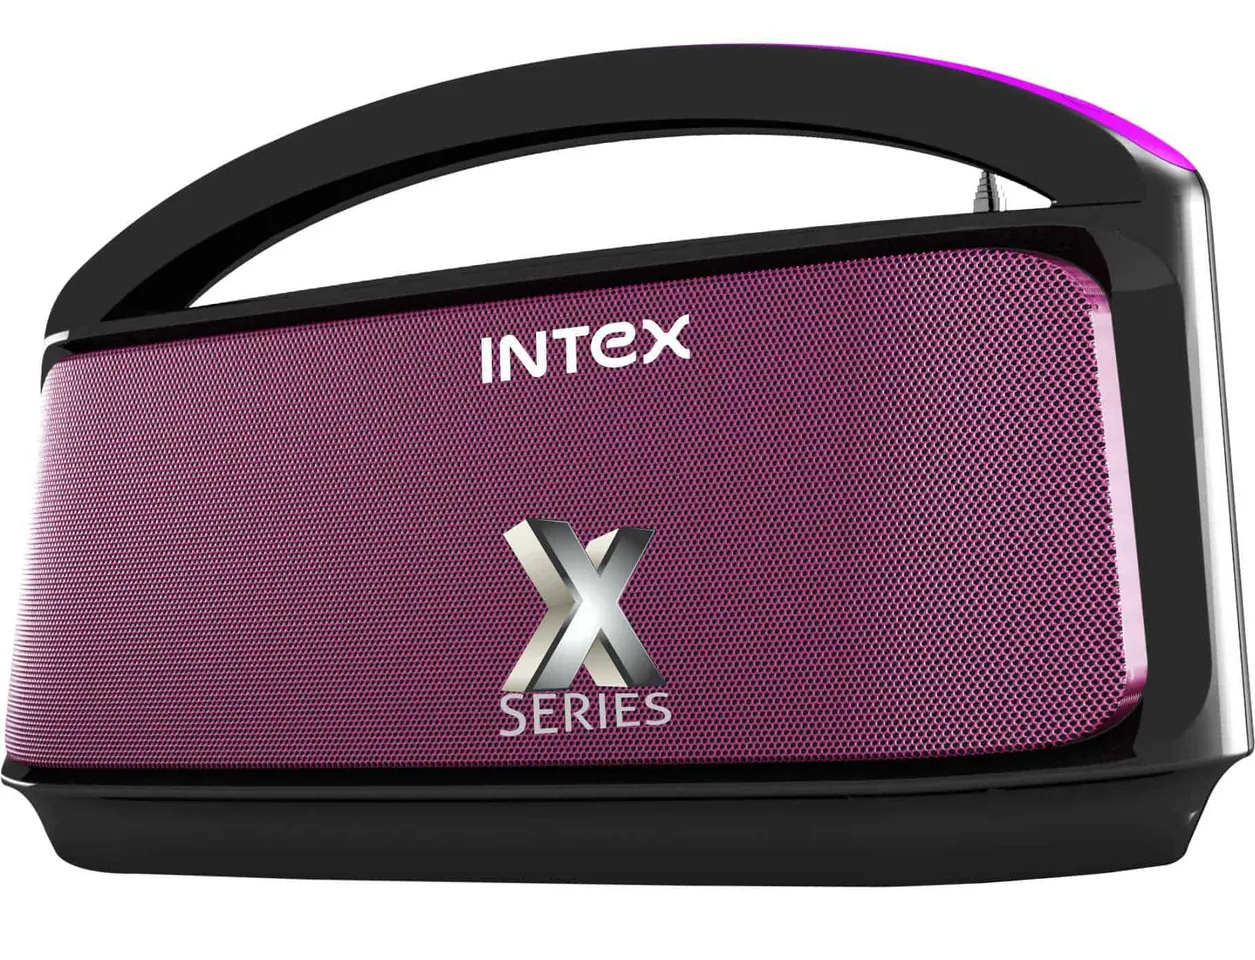 Intex rolls out one button and one time pairing portable speaker